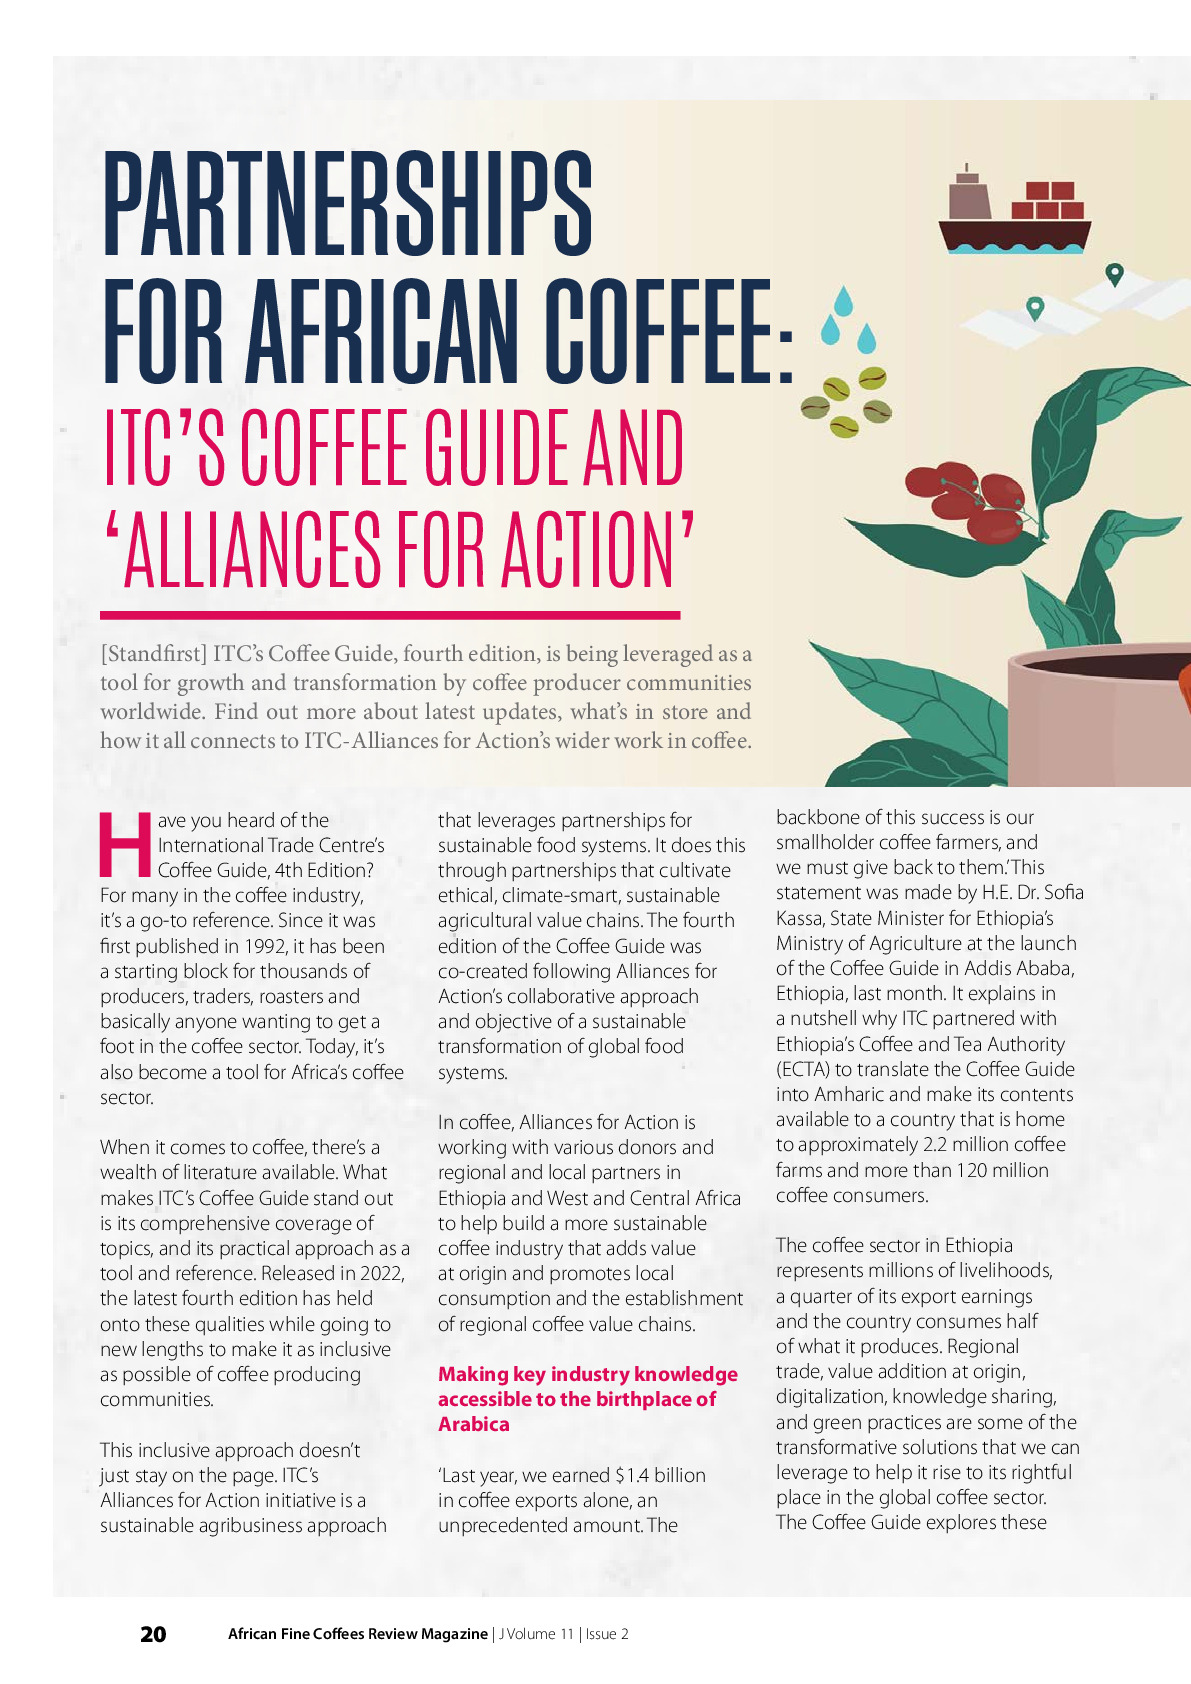 africanfine-coffeesreviewmagazine-vol-11-issue-02-p20-22